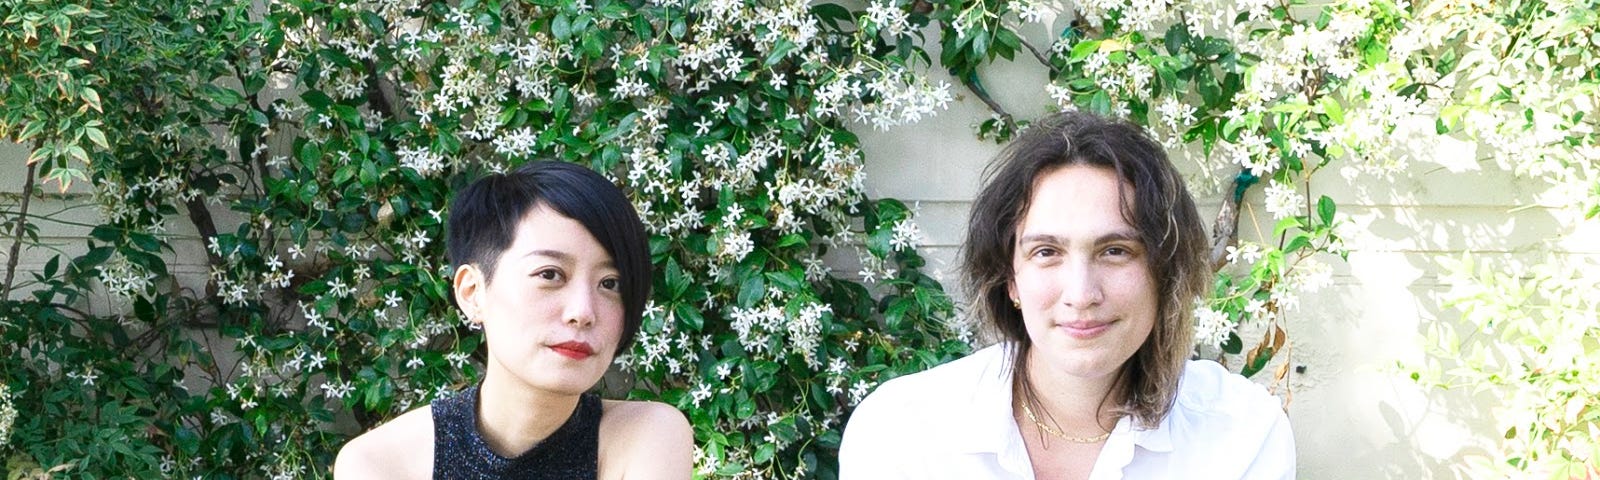 Qianqian and evelyn sitting together in a garden in Los Angeles.